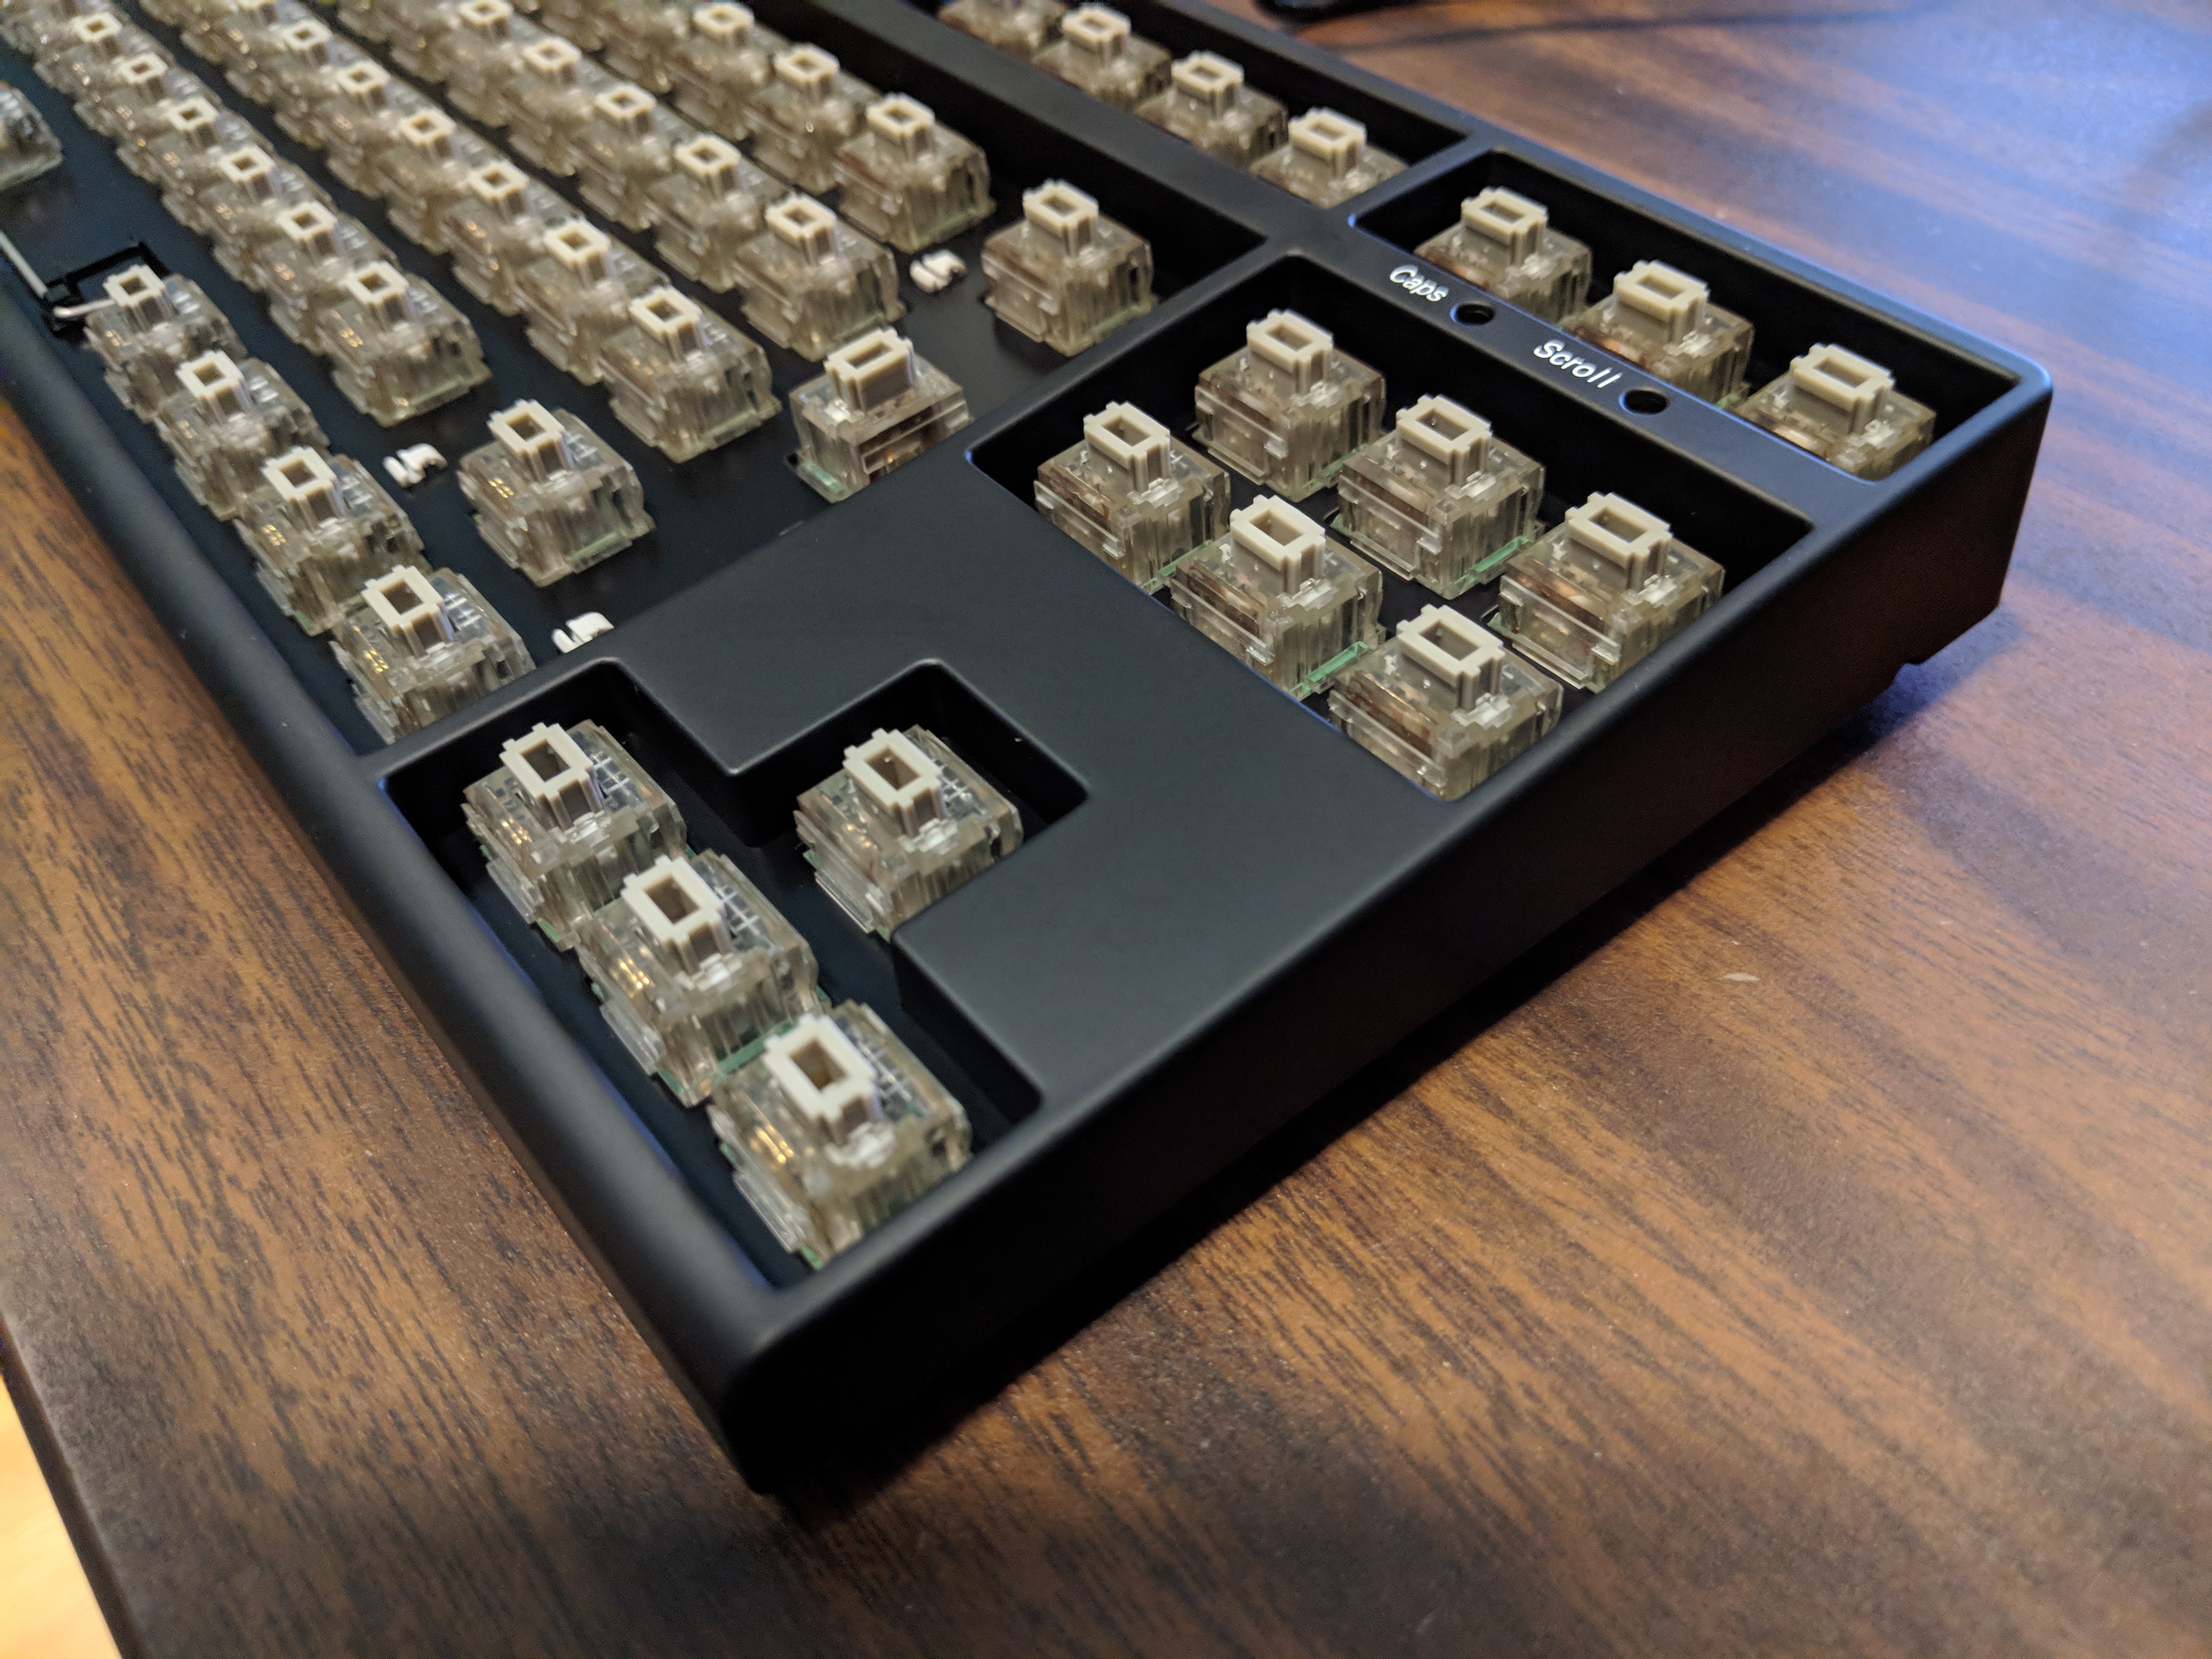 No keycaps - Right side